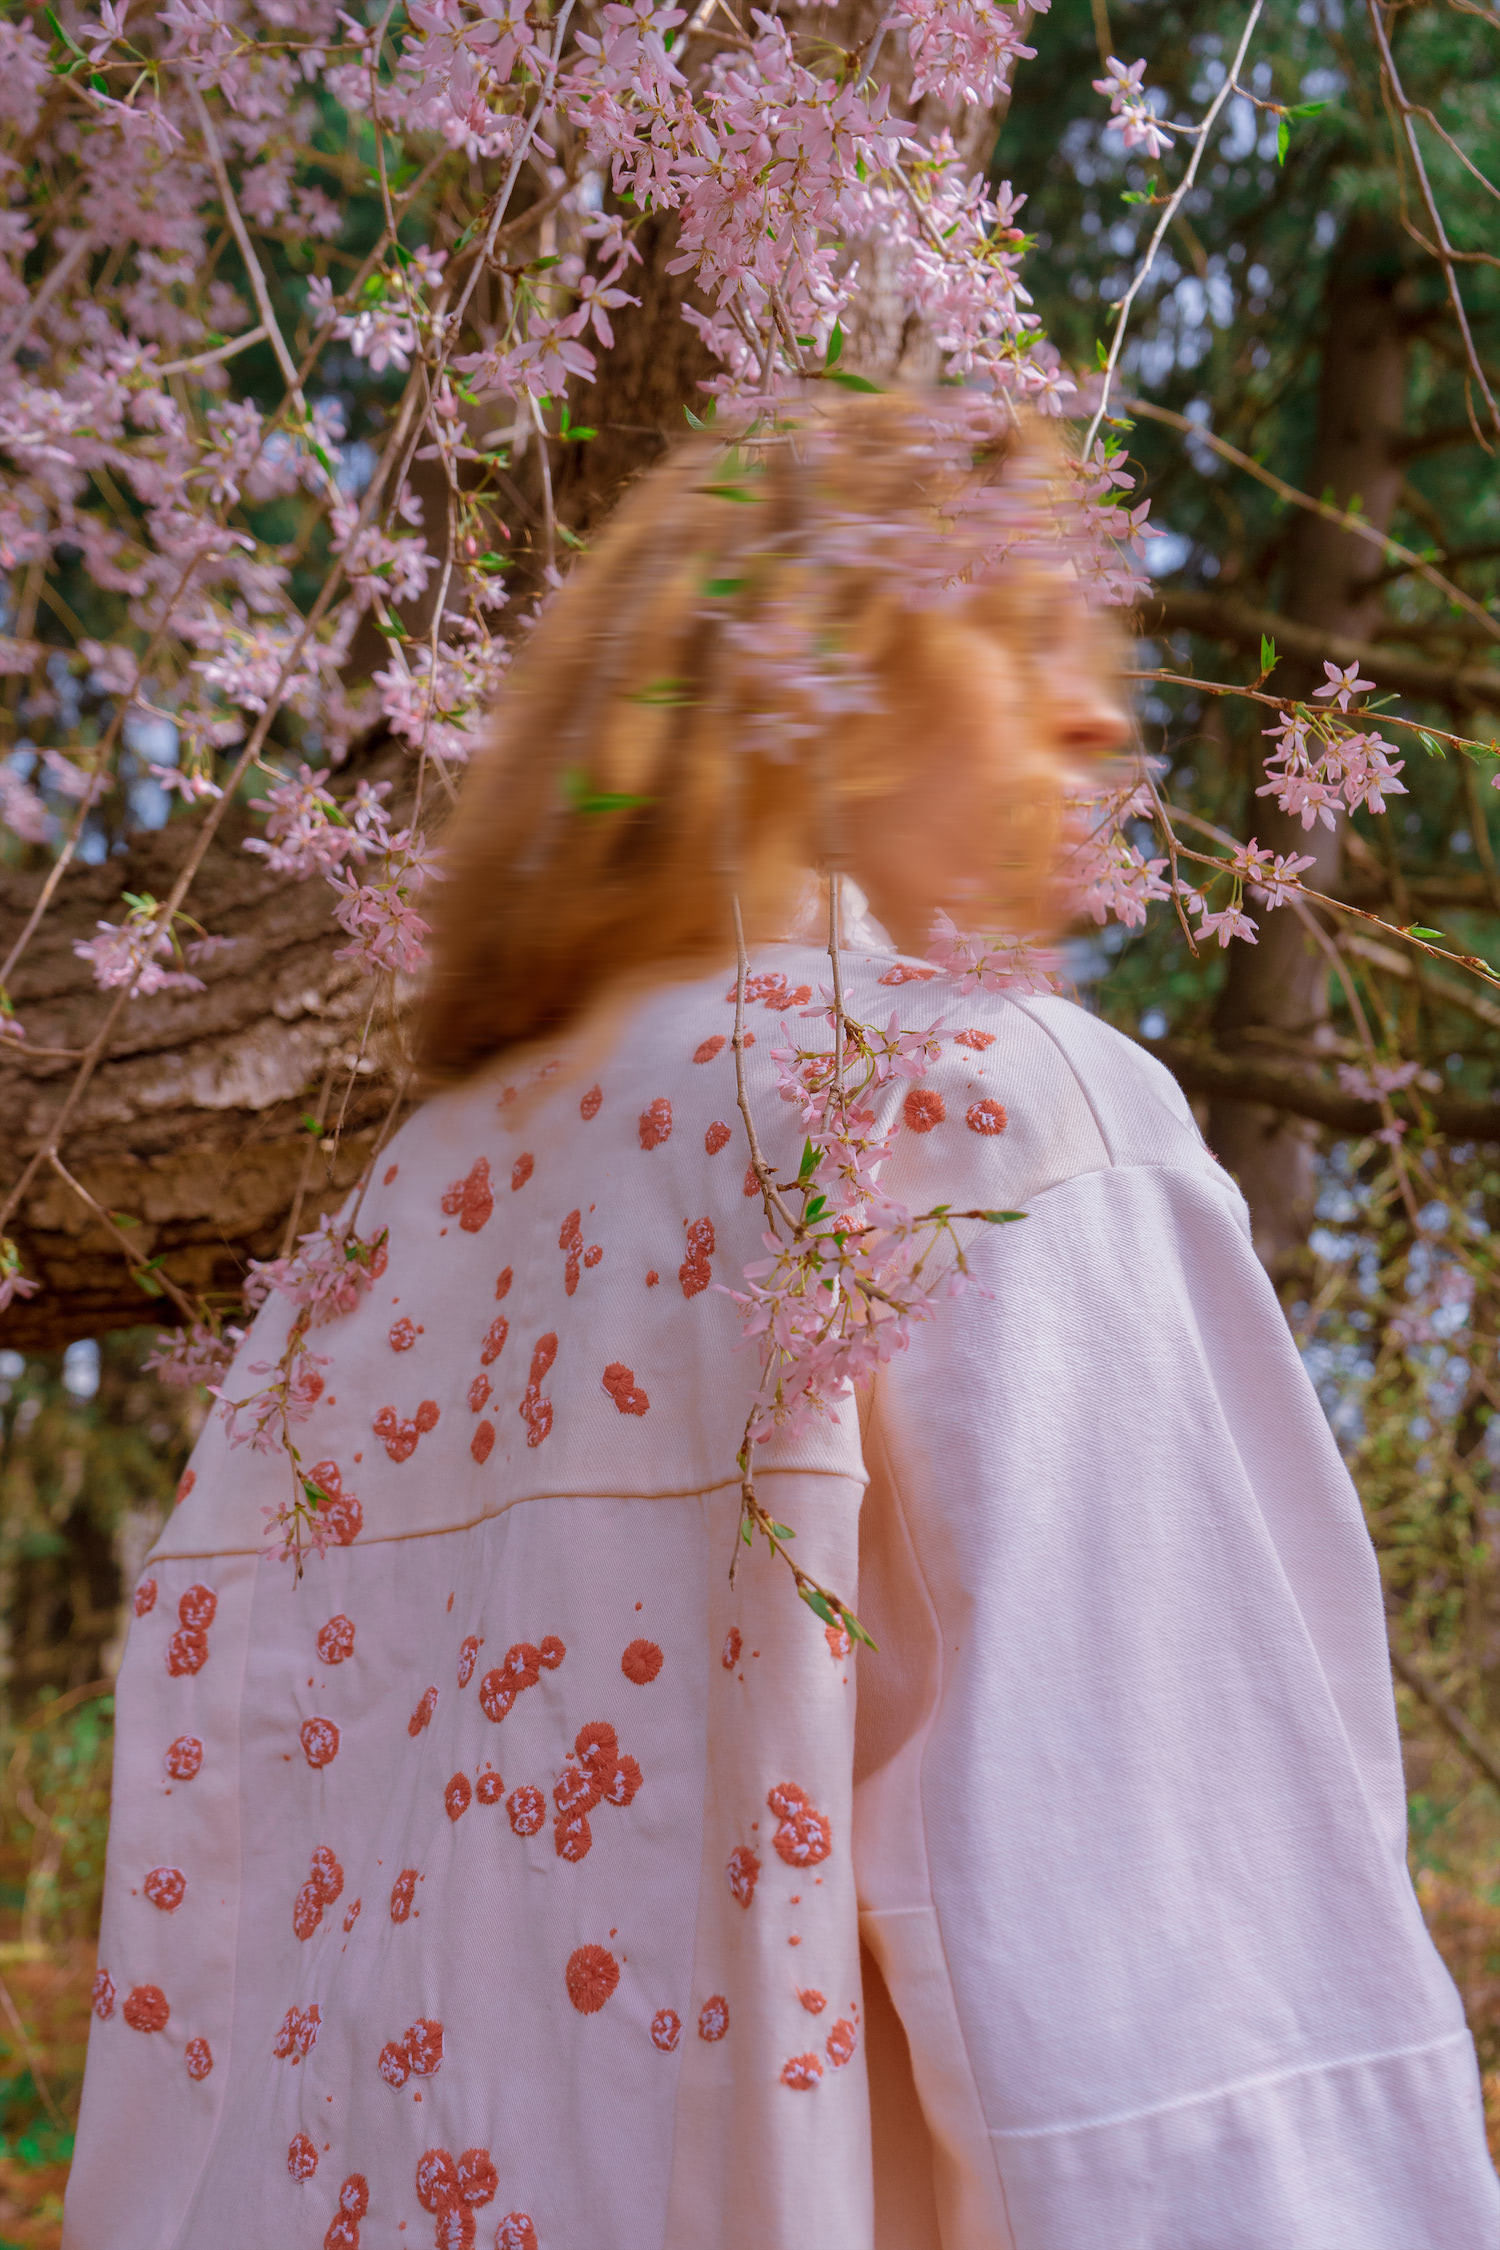 Model wearing Psoriasis jacket, facing back, looking over her shoulder, under a blossoming tree